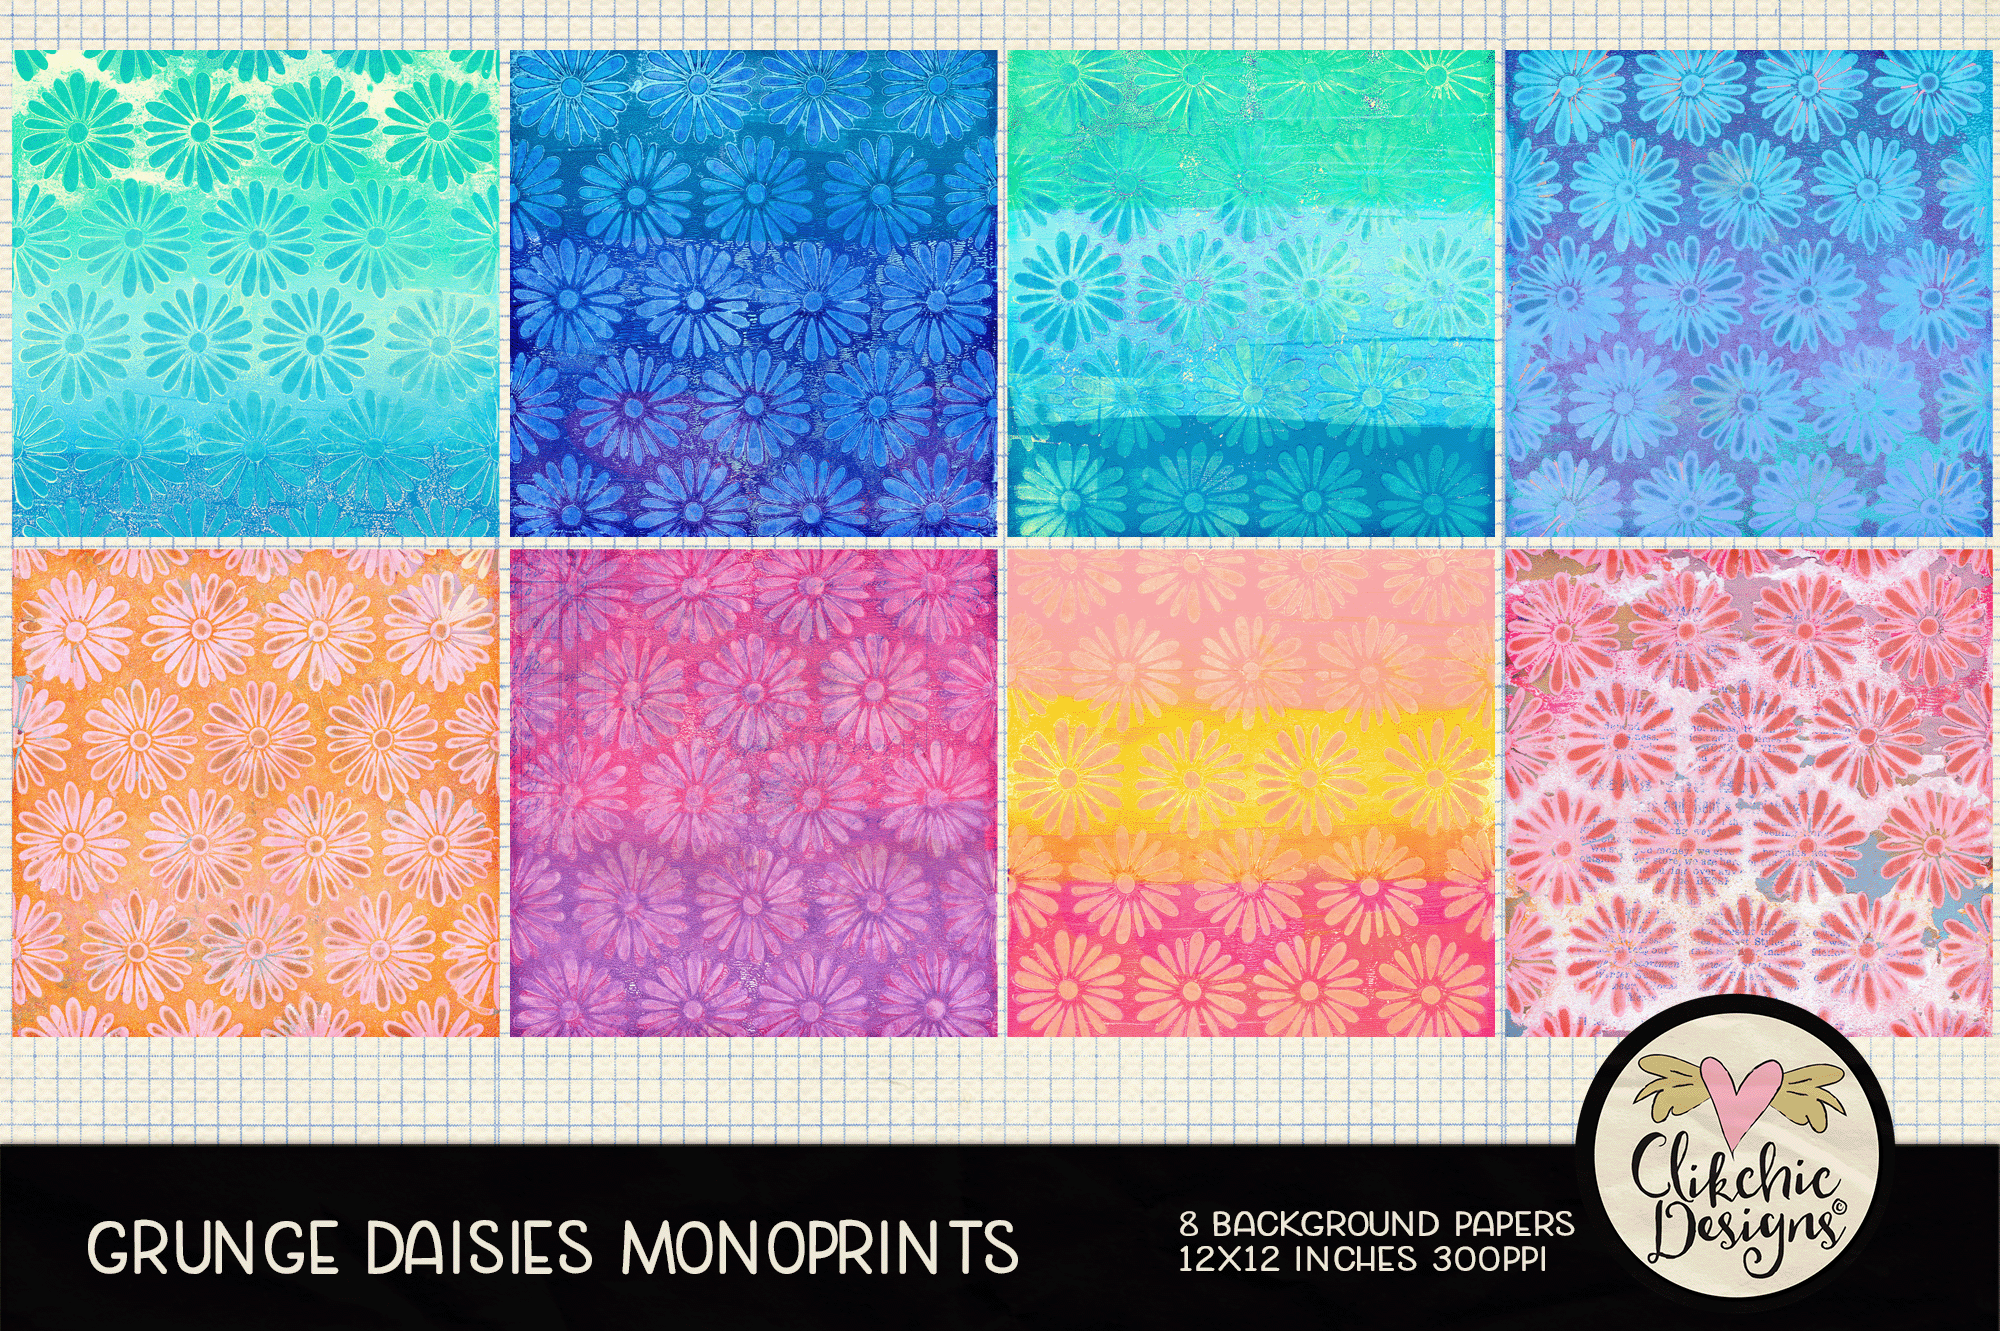 Grunge Daisies Monoprint Background Paper Pack by Clikchic Designs